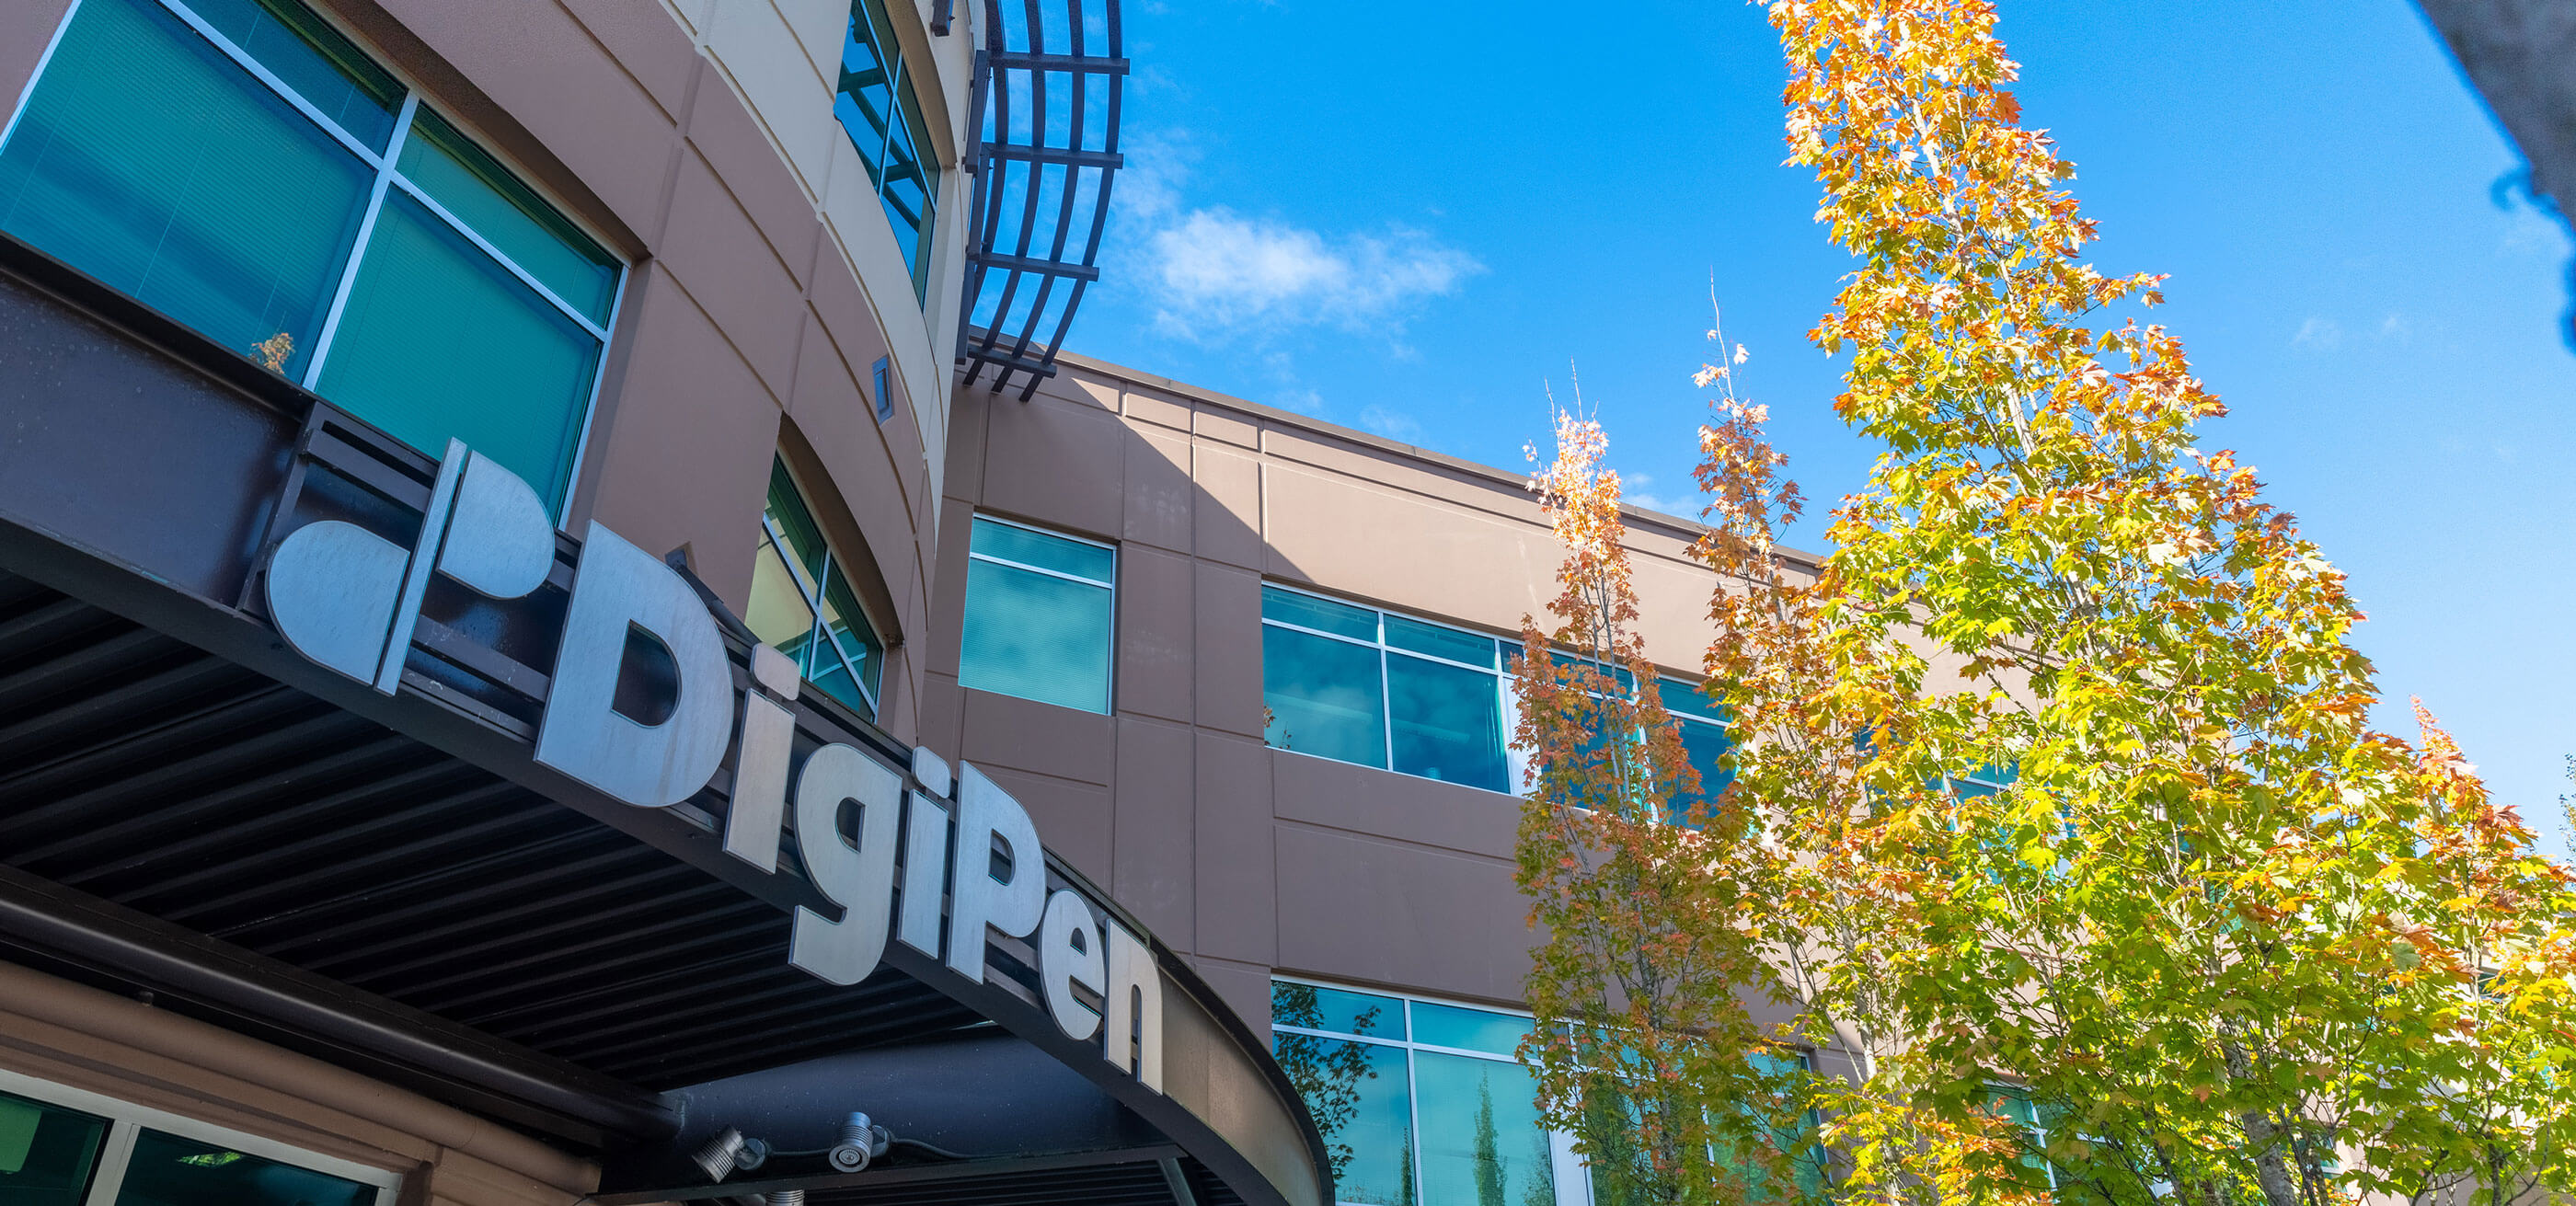 A low angle exterior shot of DigiPen's main campus building.